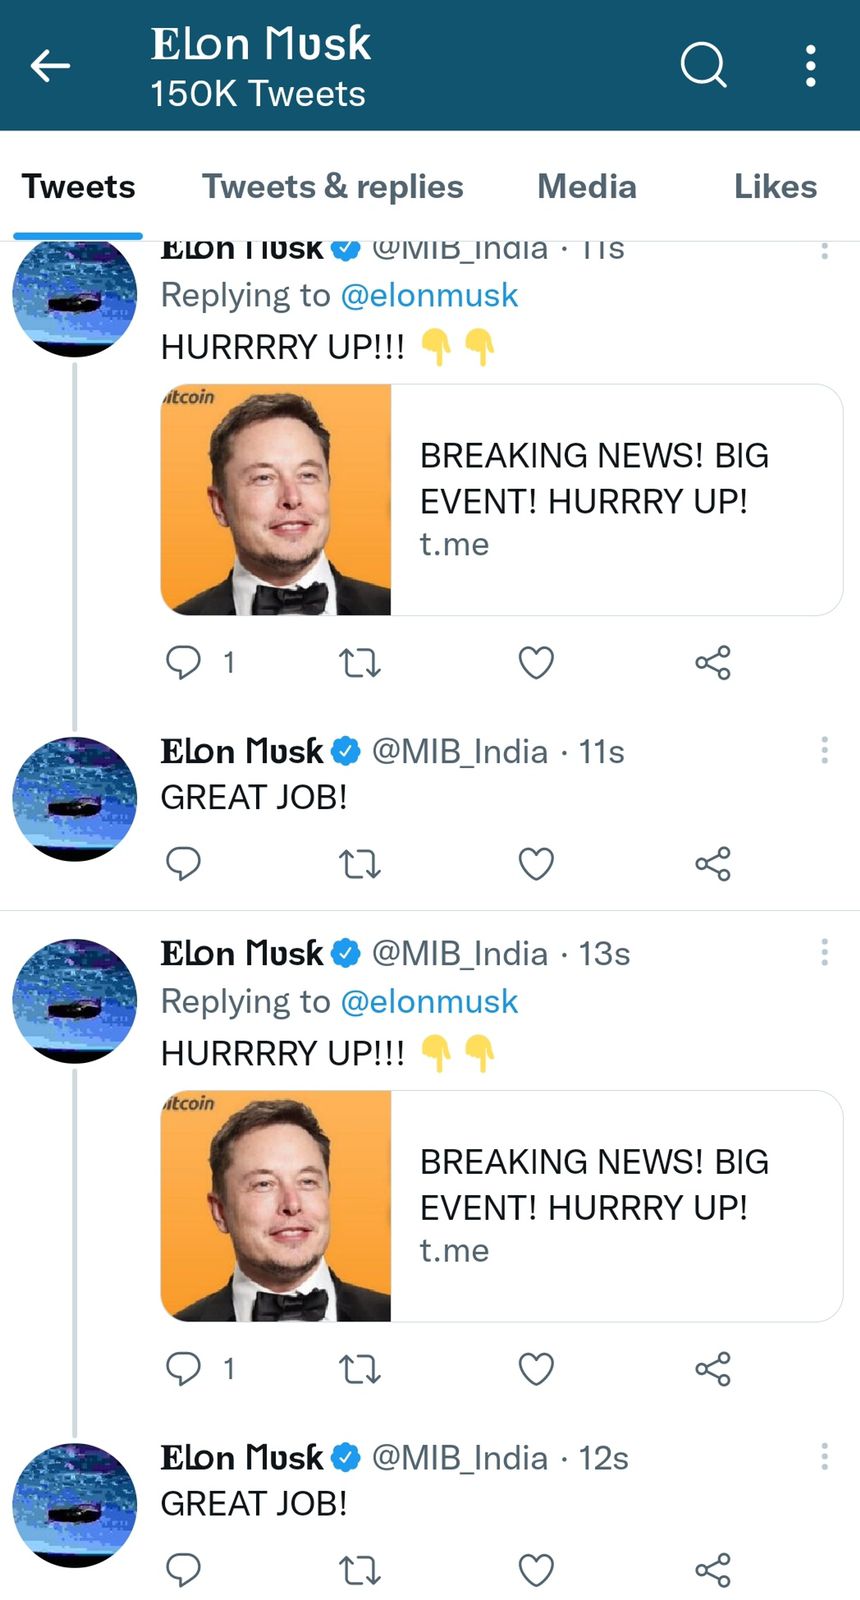 I&B Ministry Twitter Account Hacked, Became 'Elon Musk'. Restored